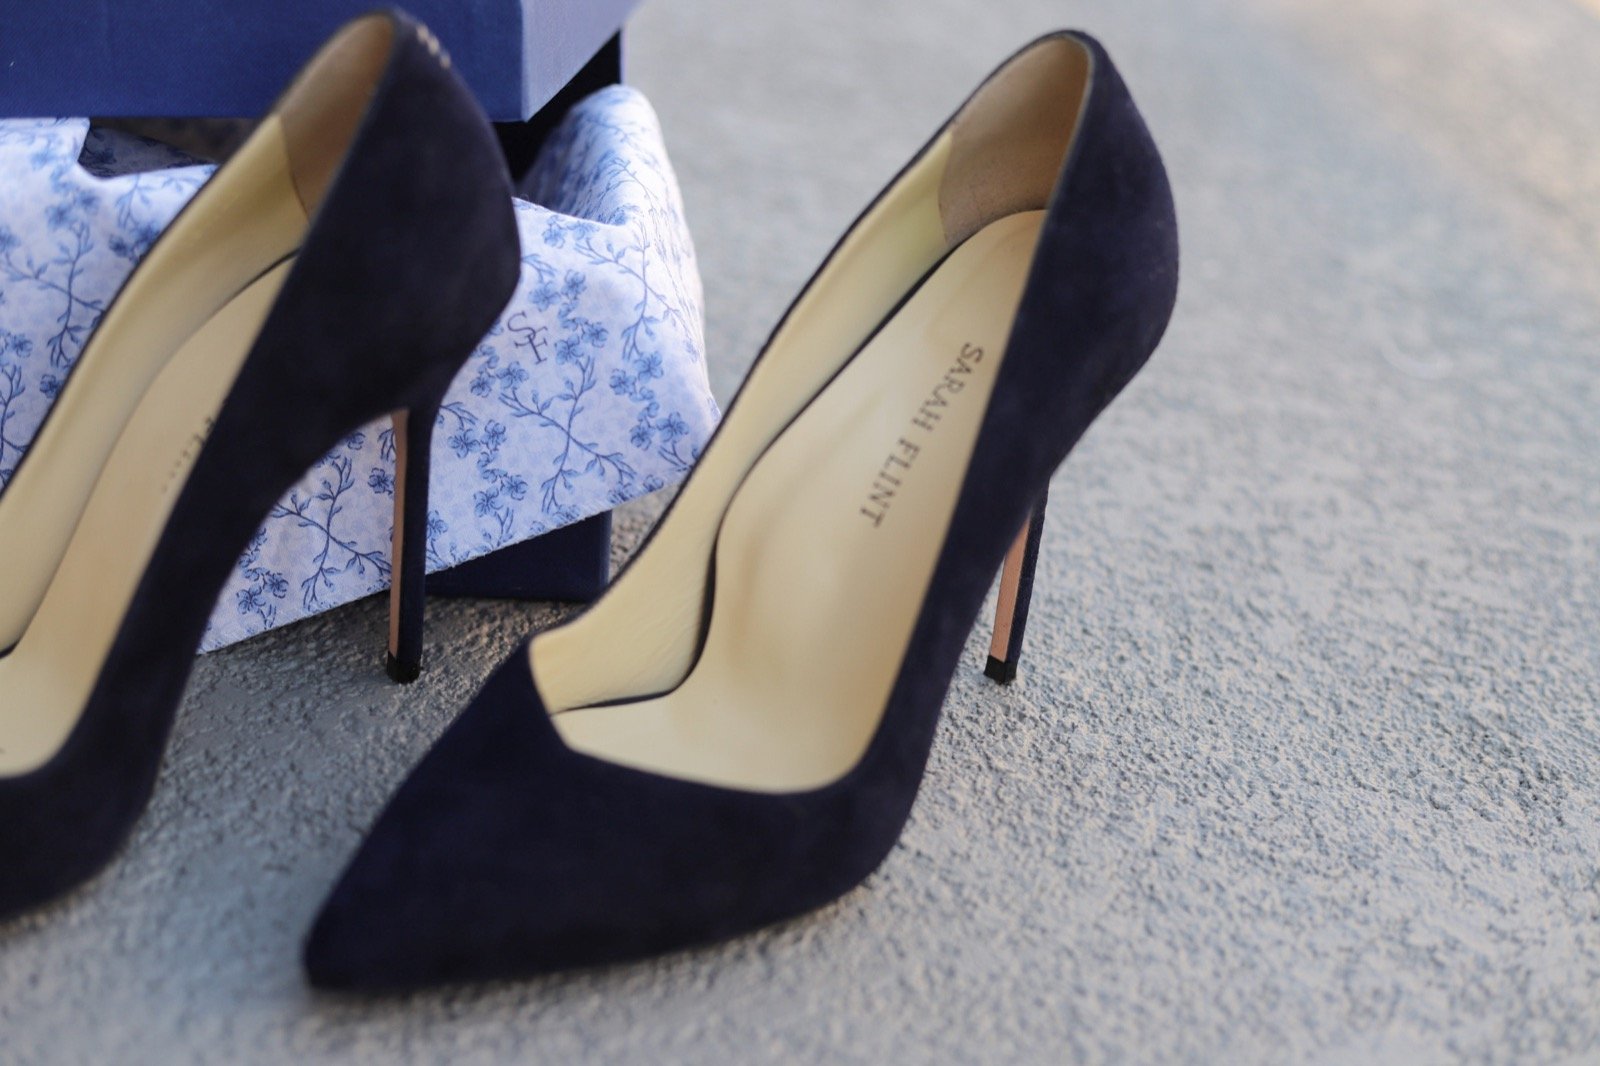 Use my Sarah Flint discount code SARAHFLINT-BALMENTSOFSTYLE for $50 off your Sarah Flint purchase! Perfect 100 Pumps in Navy Suede